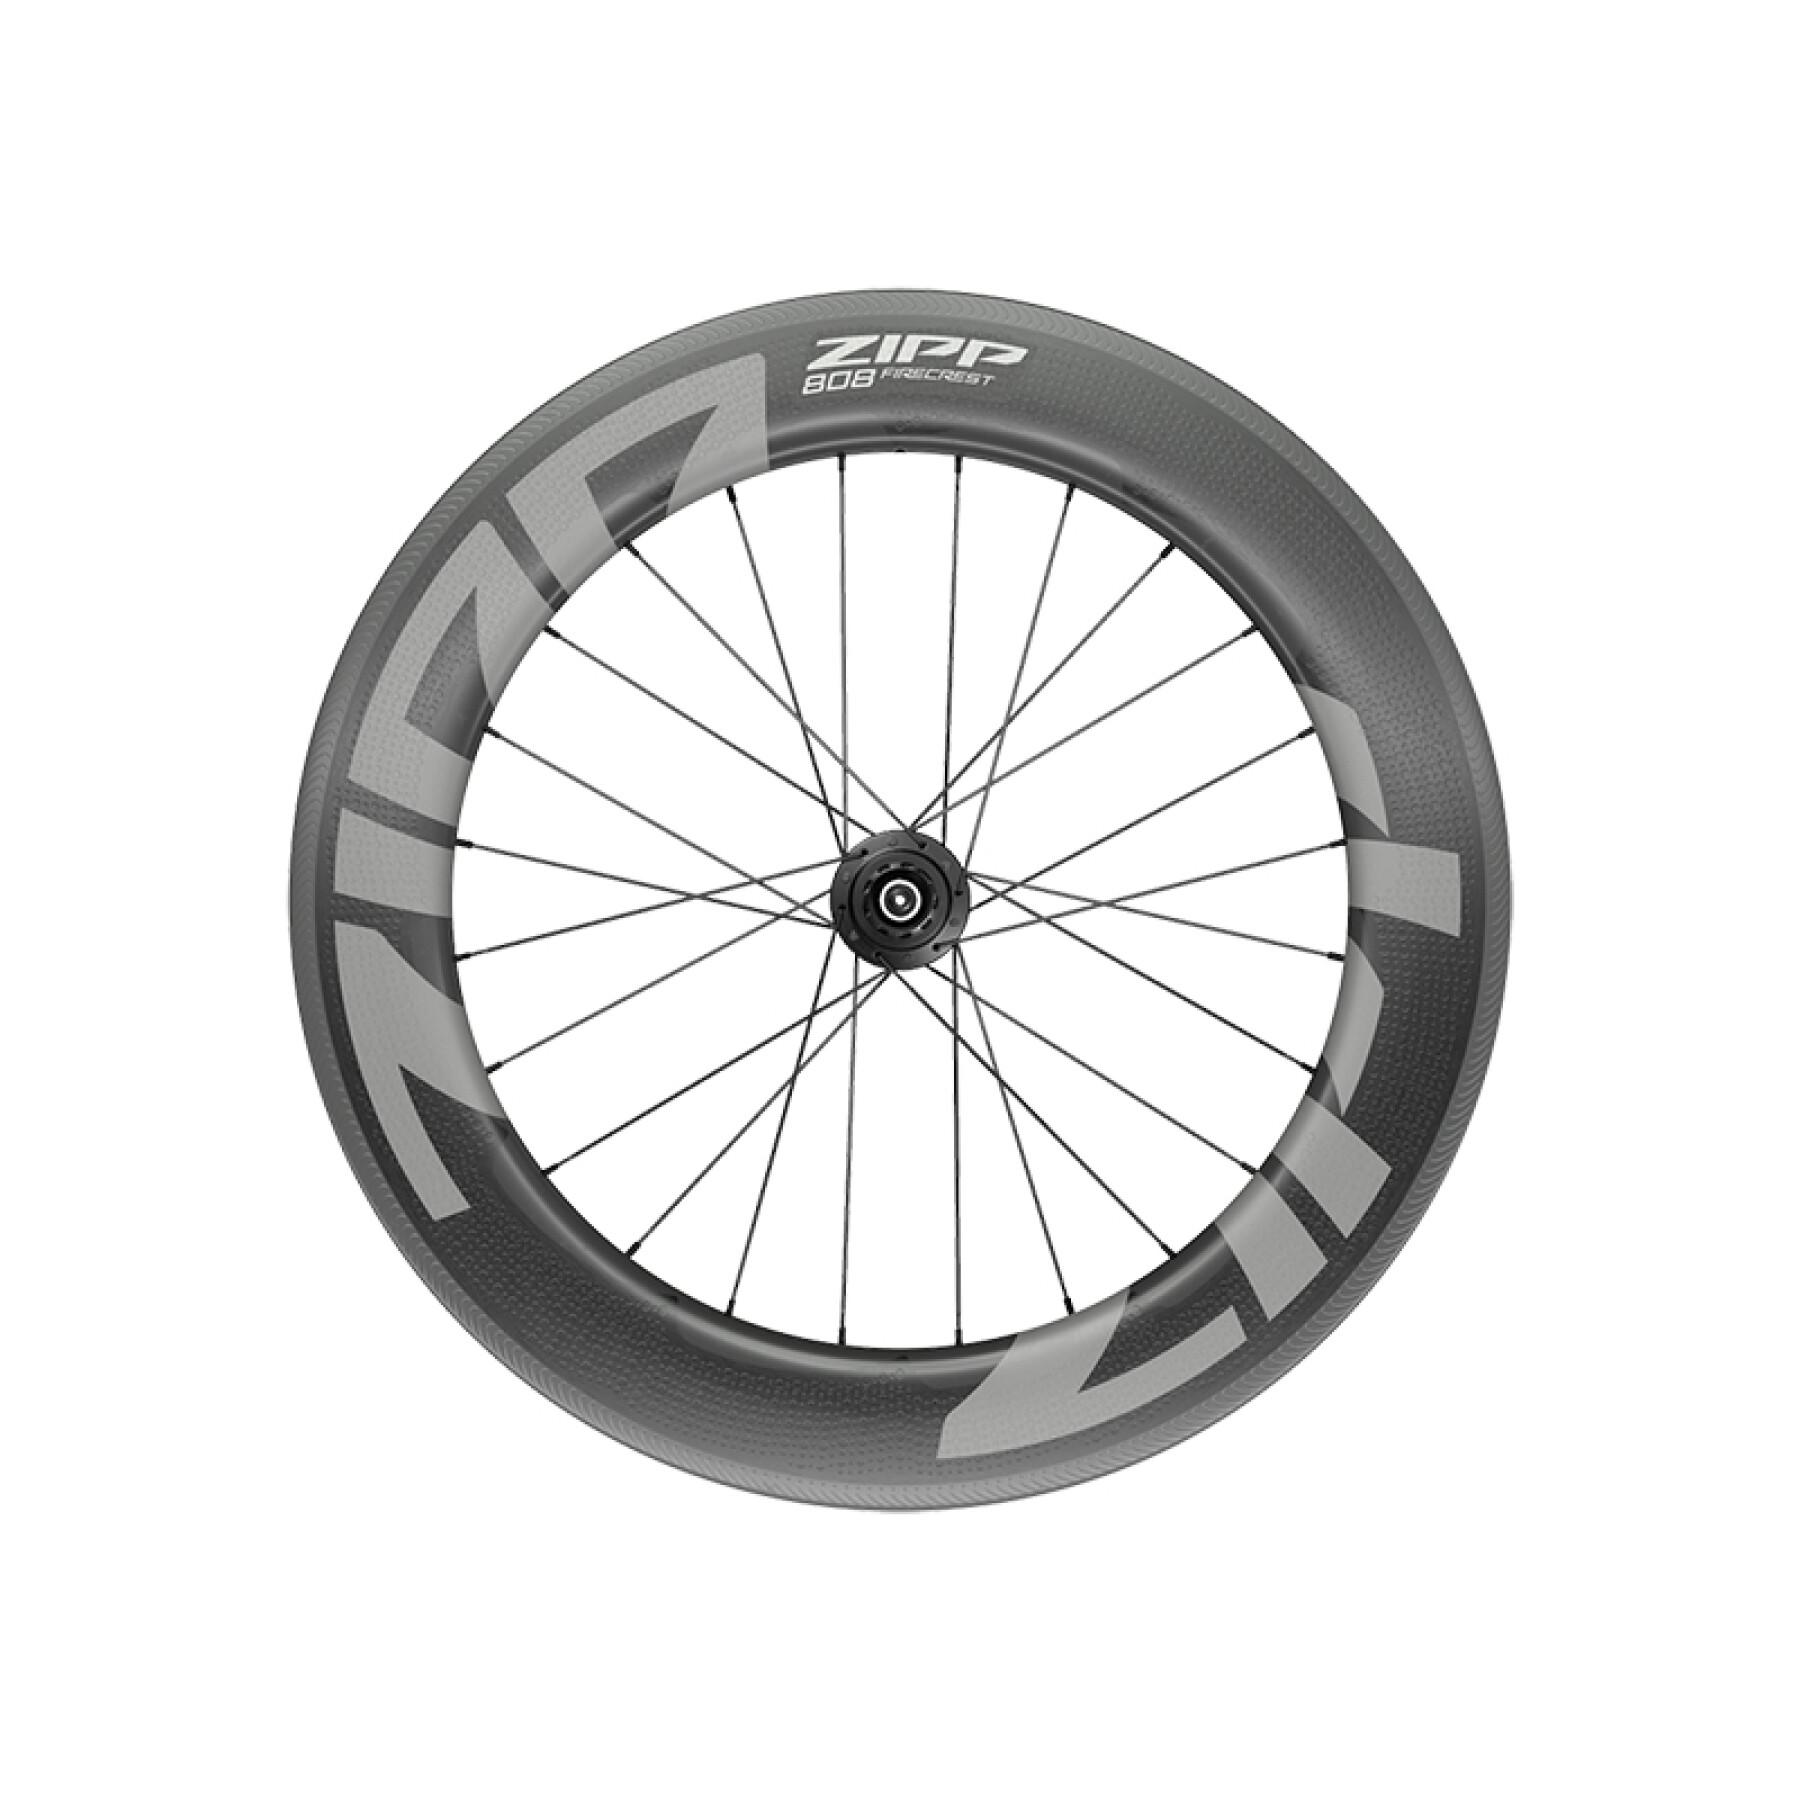 Rear bike wheel with quick release in carbon without inner tube Zipp 808 Firecrest Sram 10/11 v